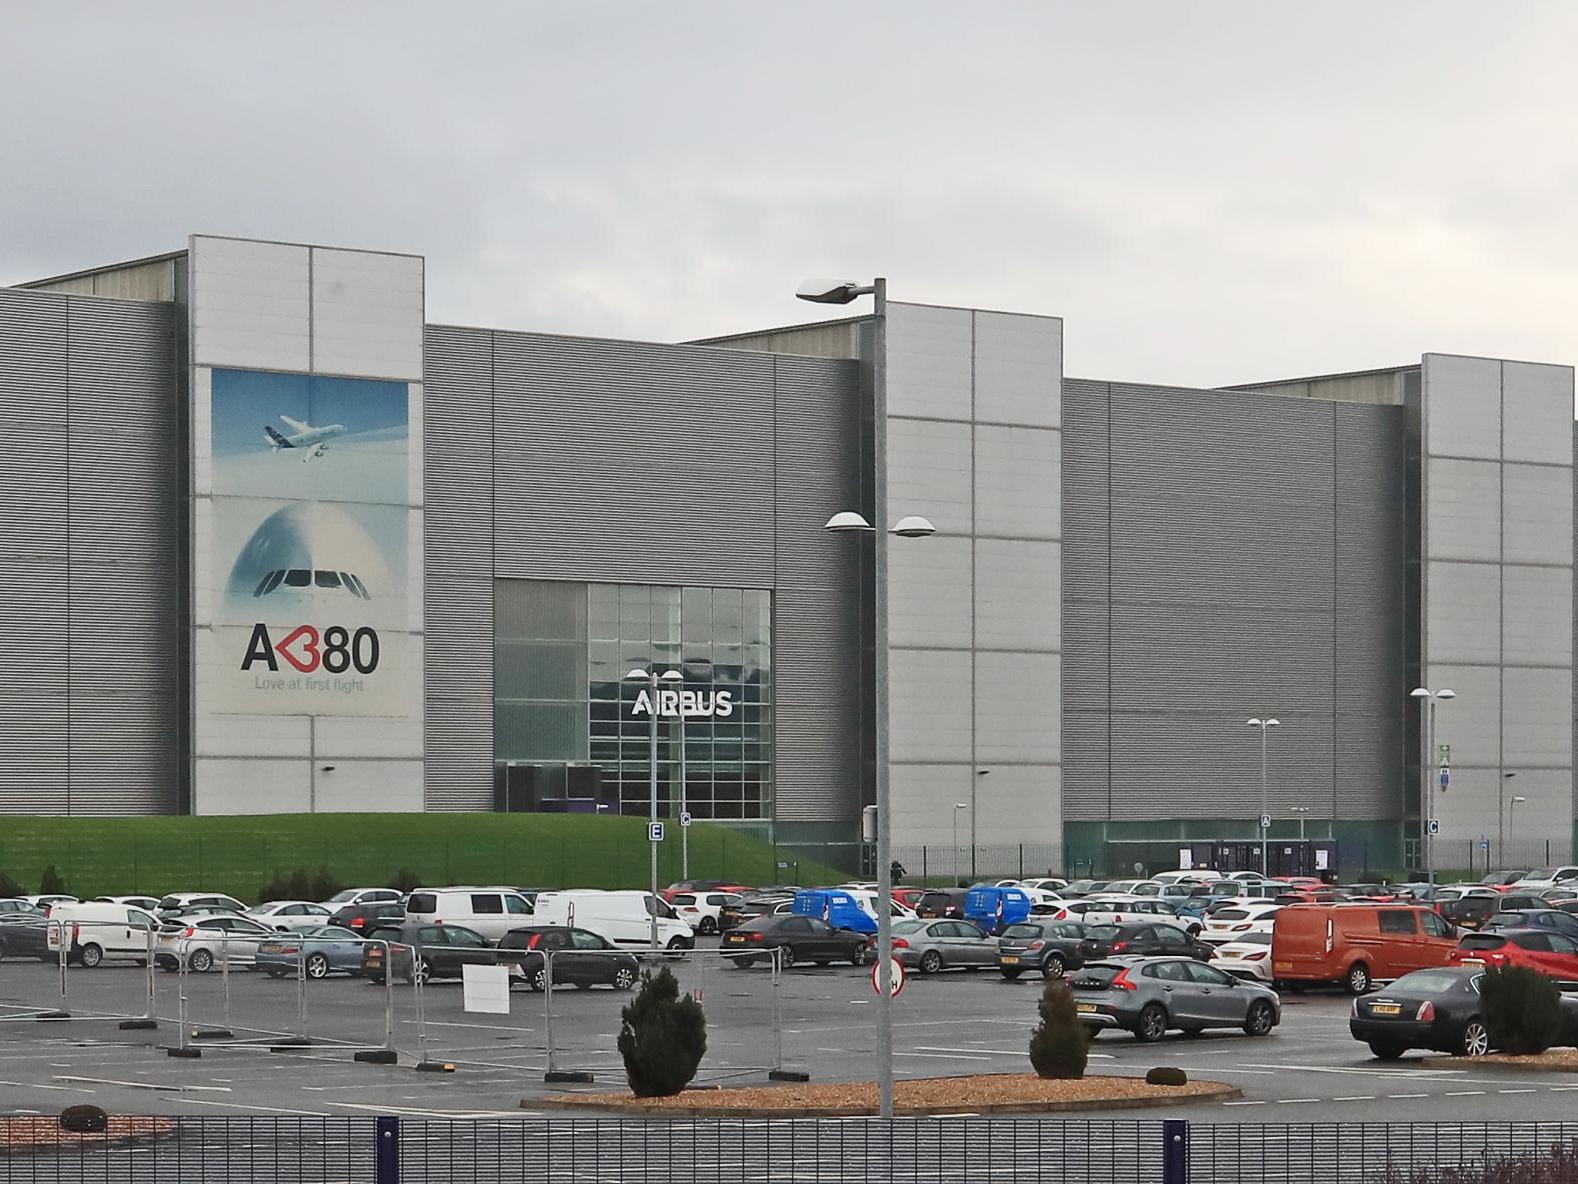 The Airbus wing assembly factory in Broughton, North Wales.